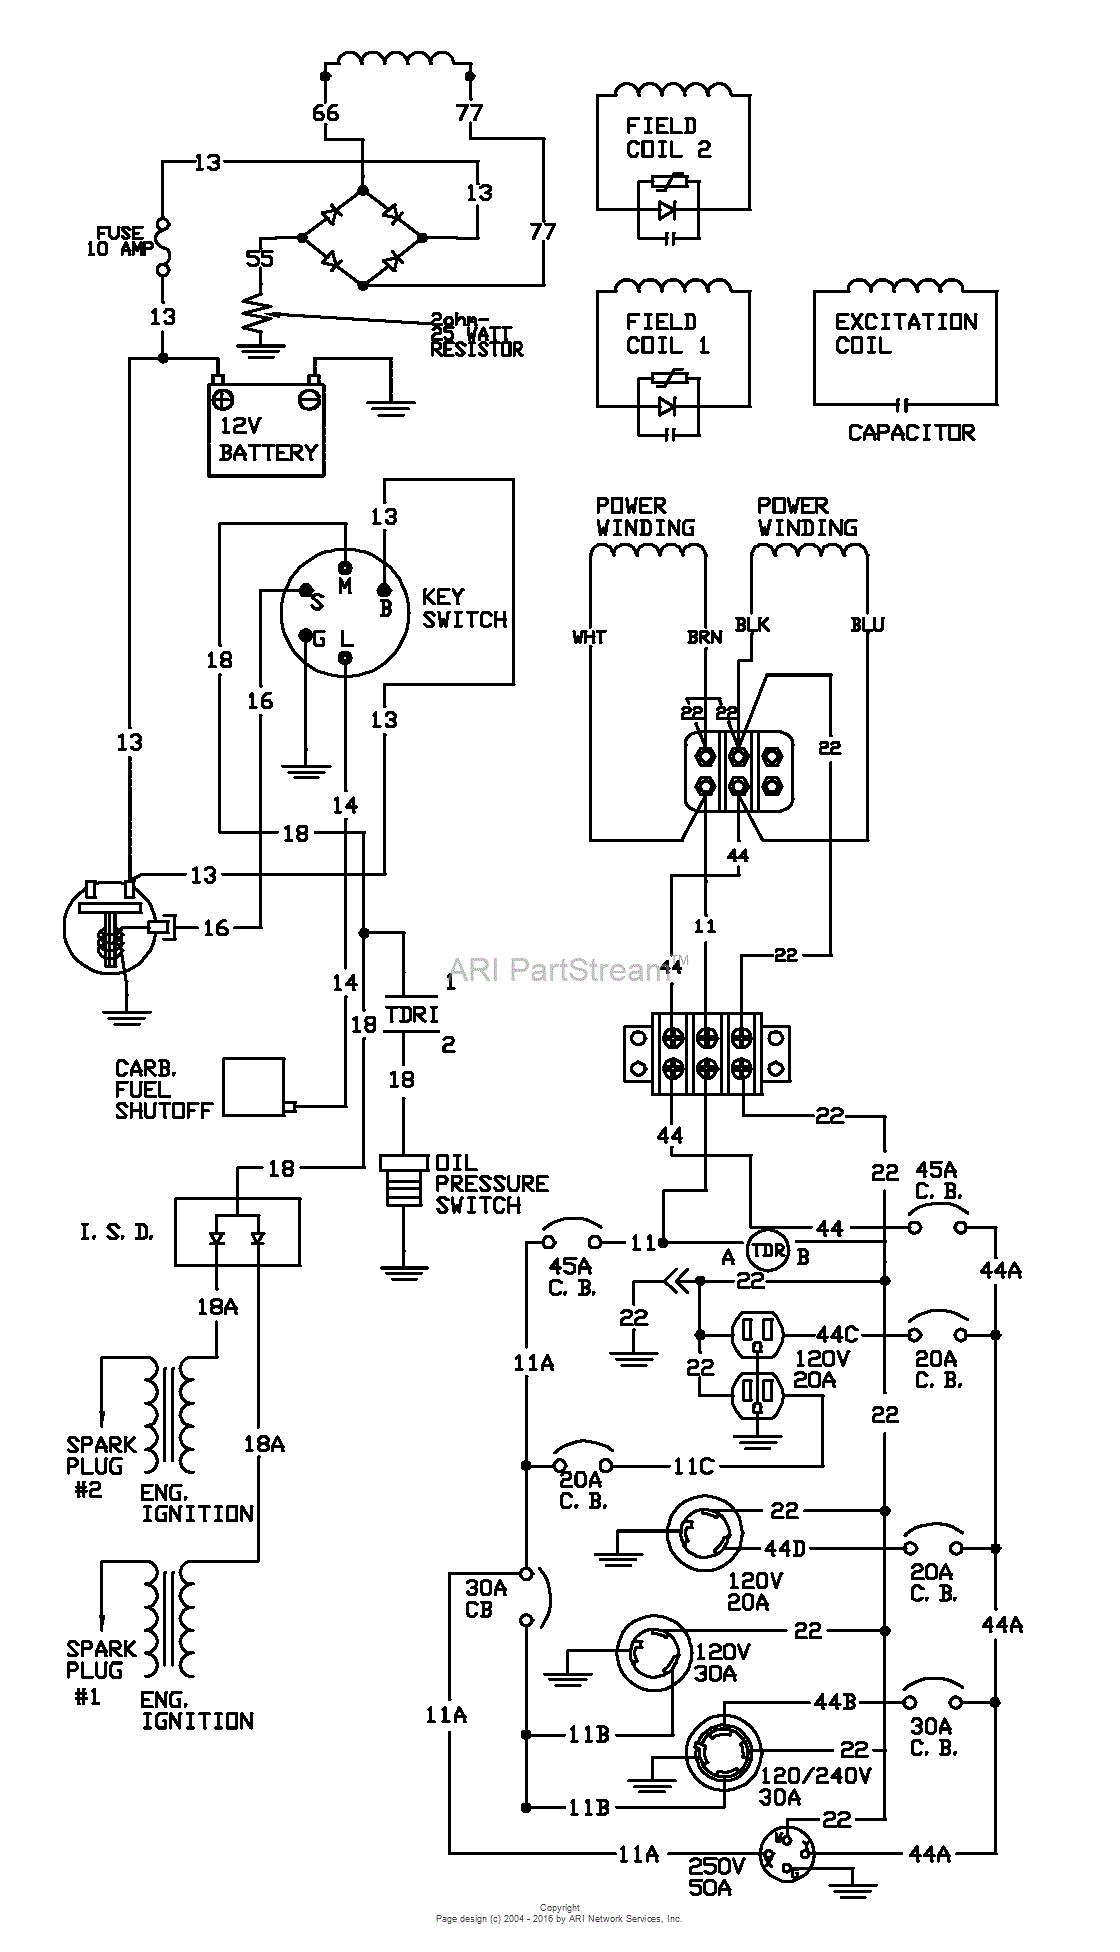 Briggs and Stratton Power Products 1338-1 - 9,000 Watt Parts Diagram